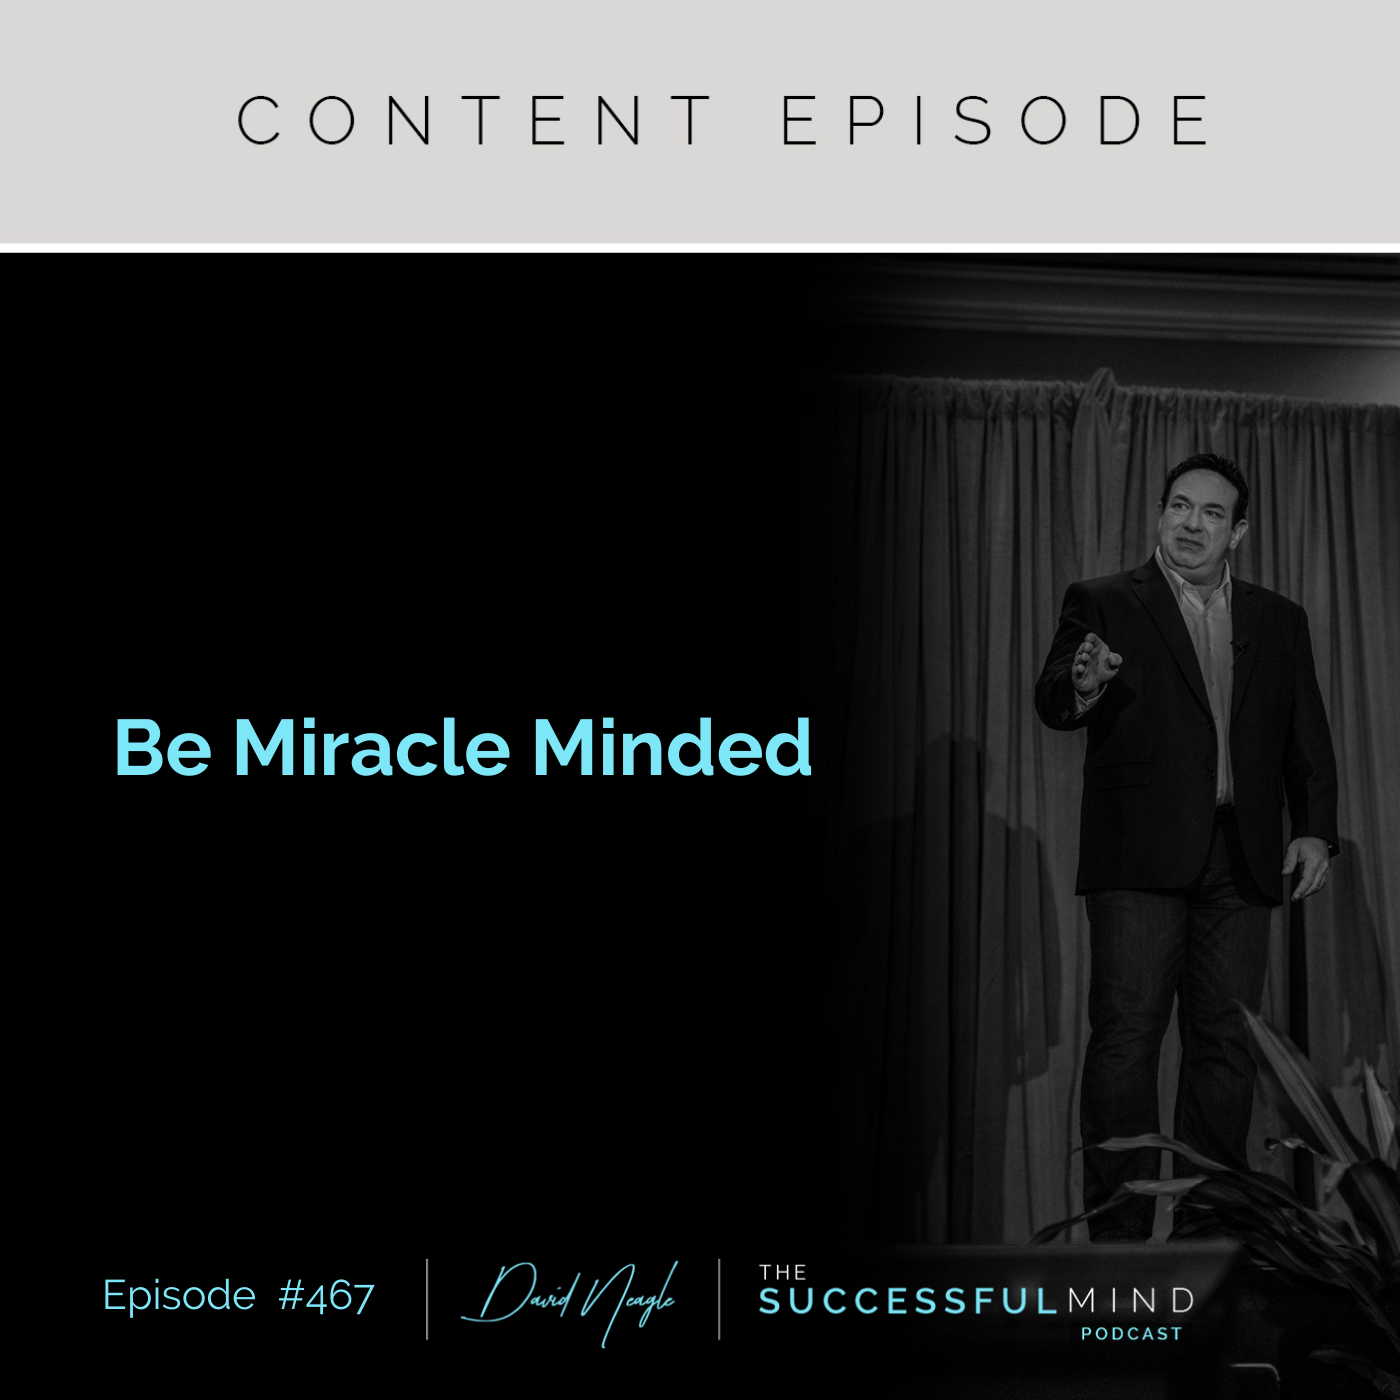 The Successful Mind Podcast - Episode 467 - Be Miracle Minded